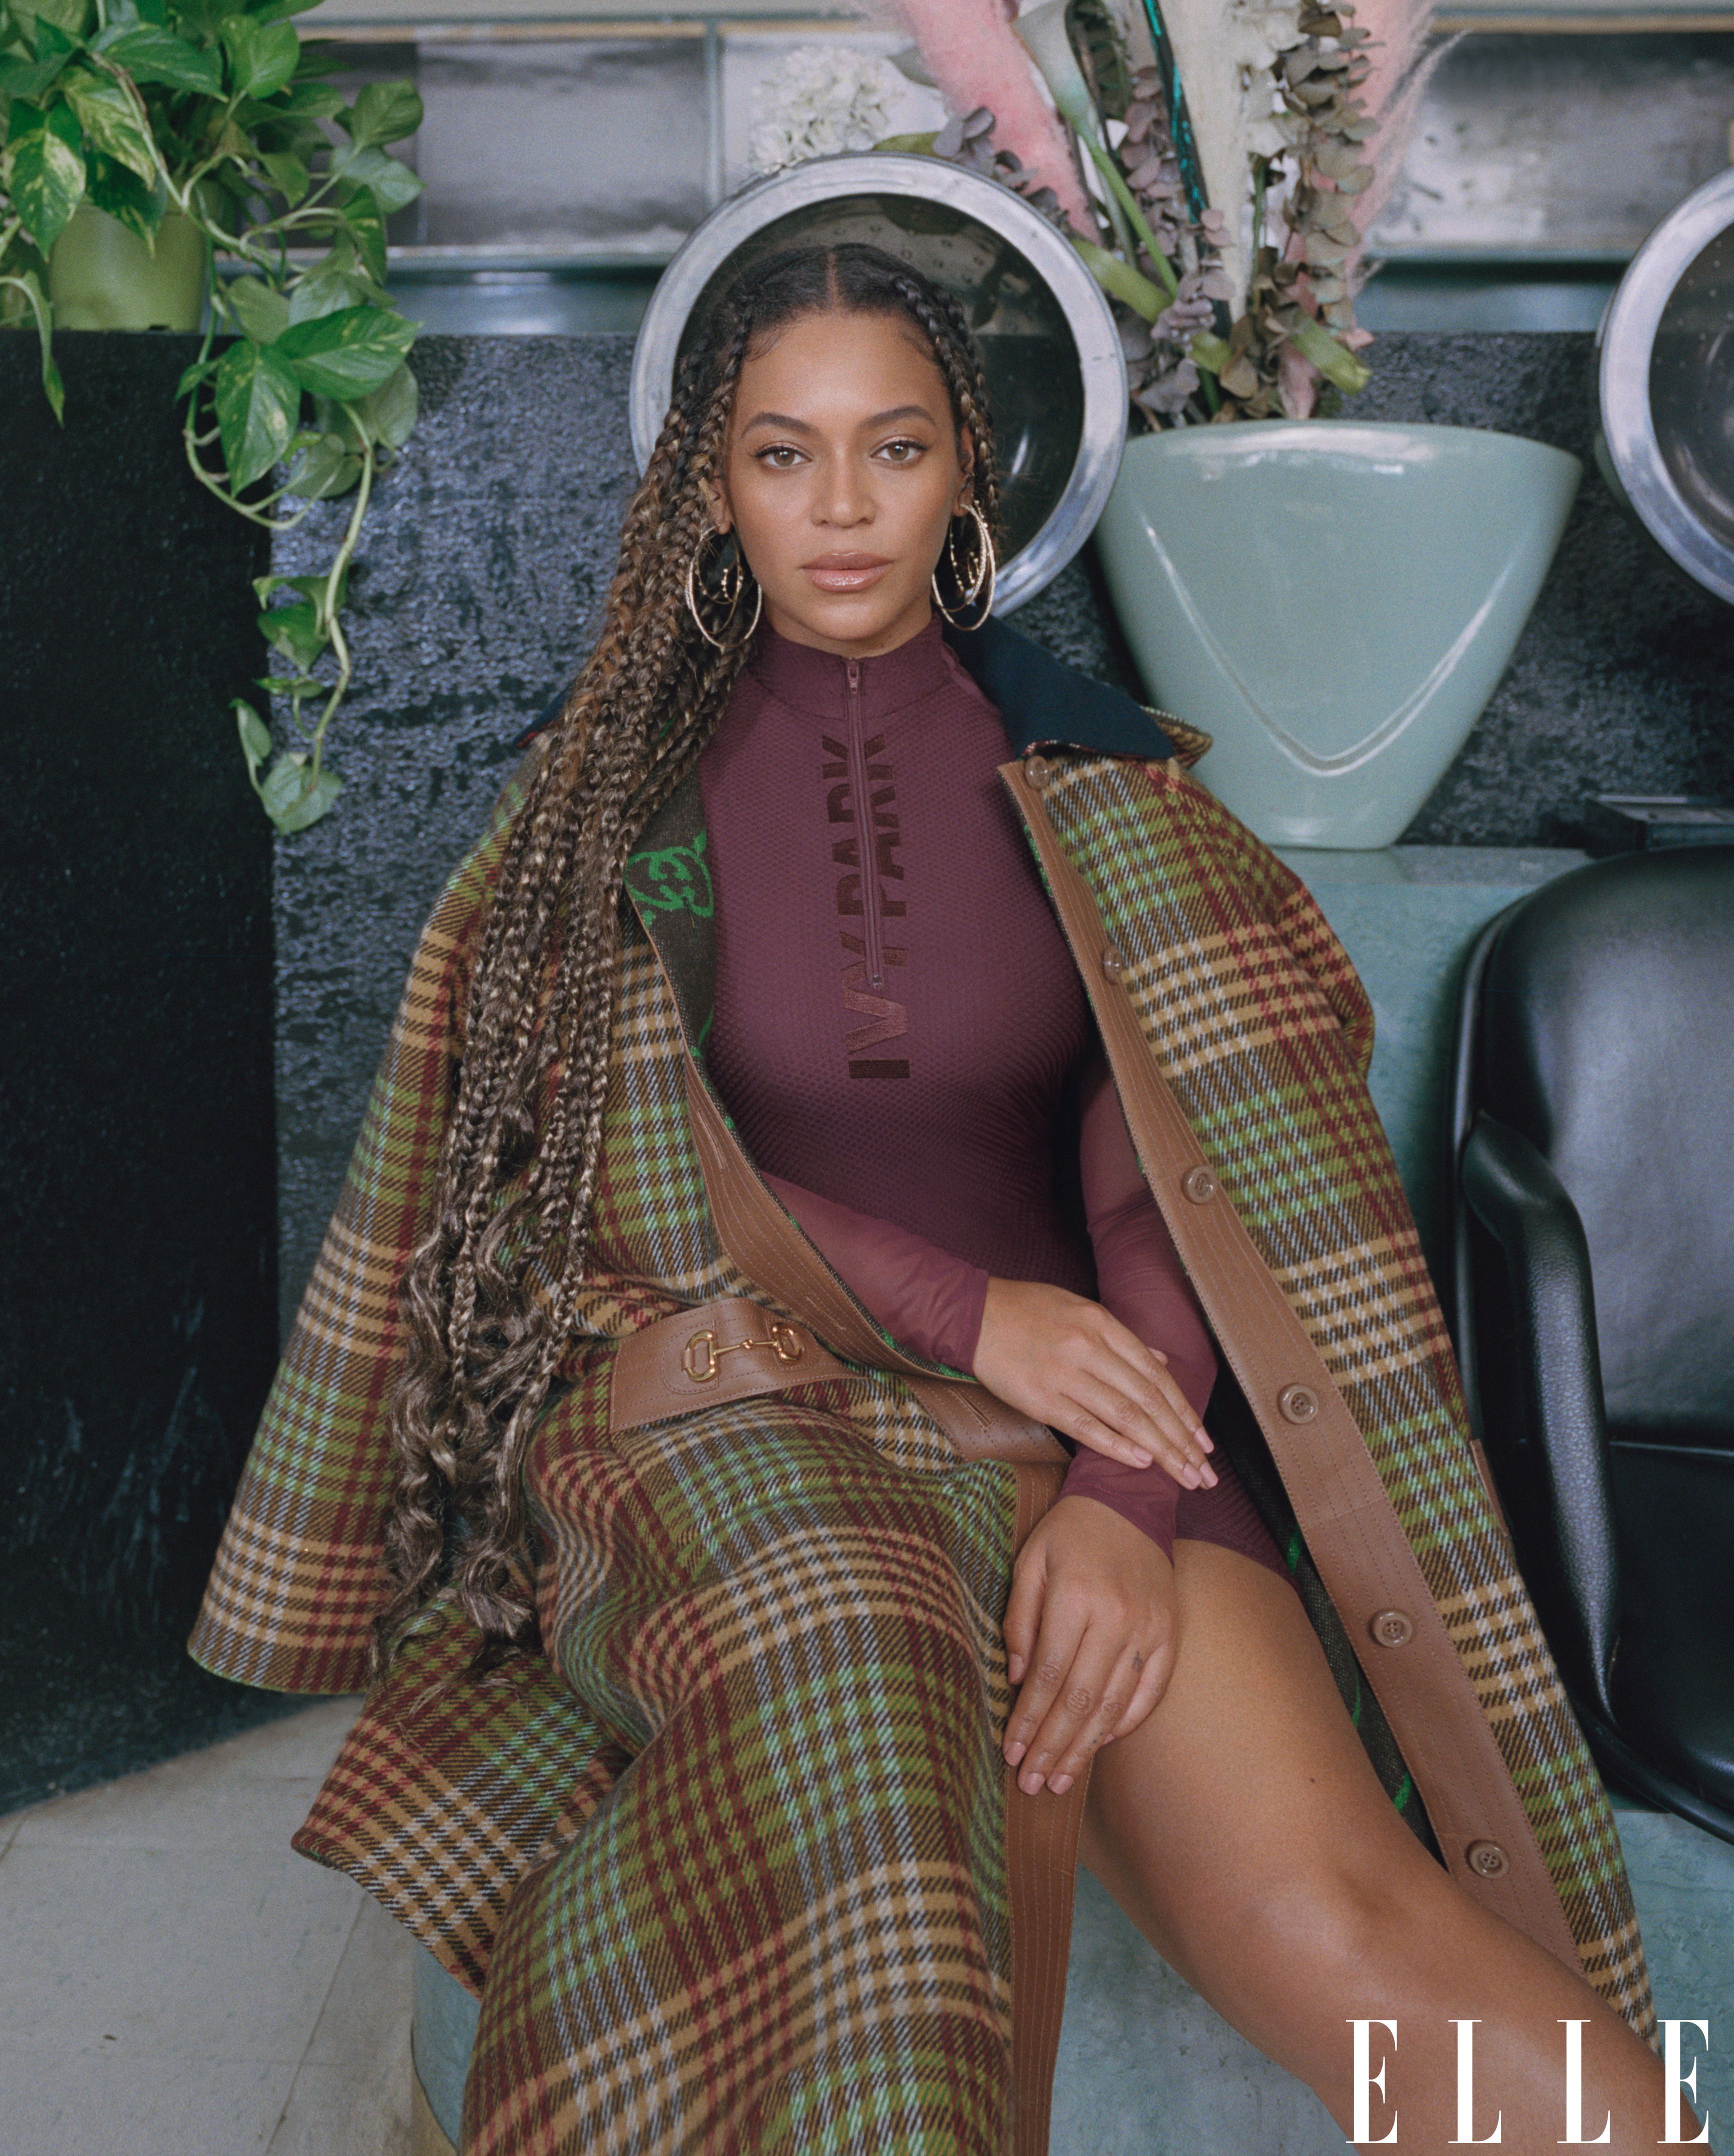 Beyoncé On Motherhood, Self Care, And Her Quest For Purposeé Launches IVY PARK X Adidas